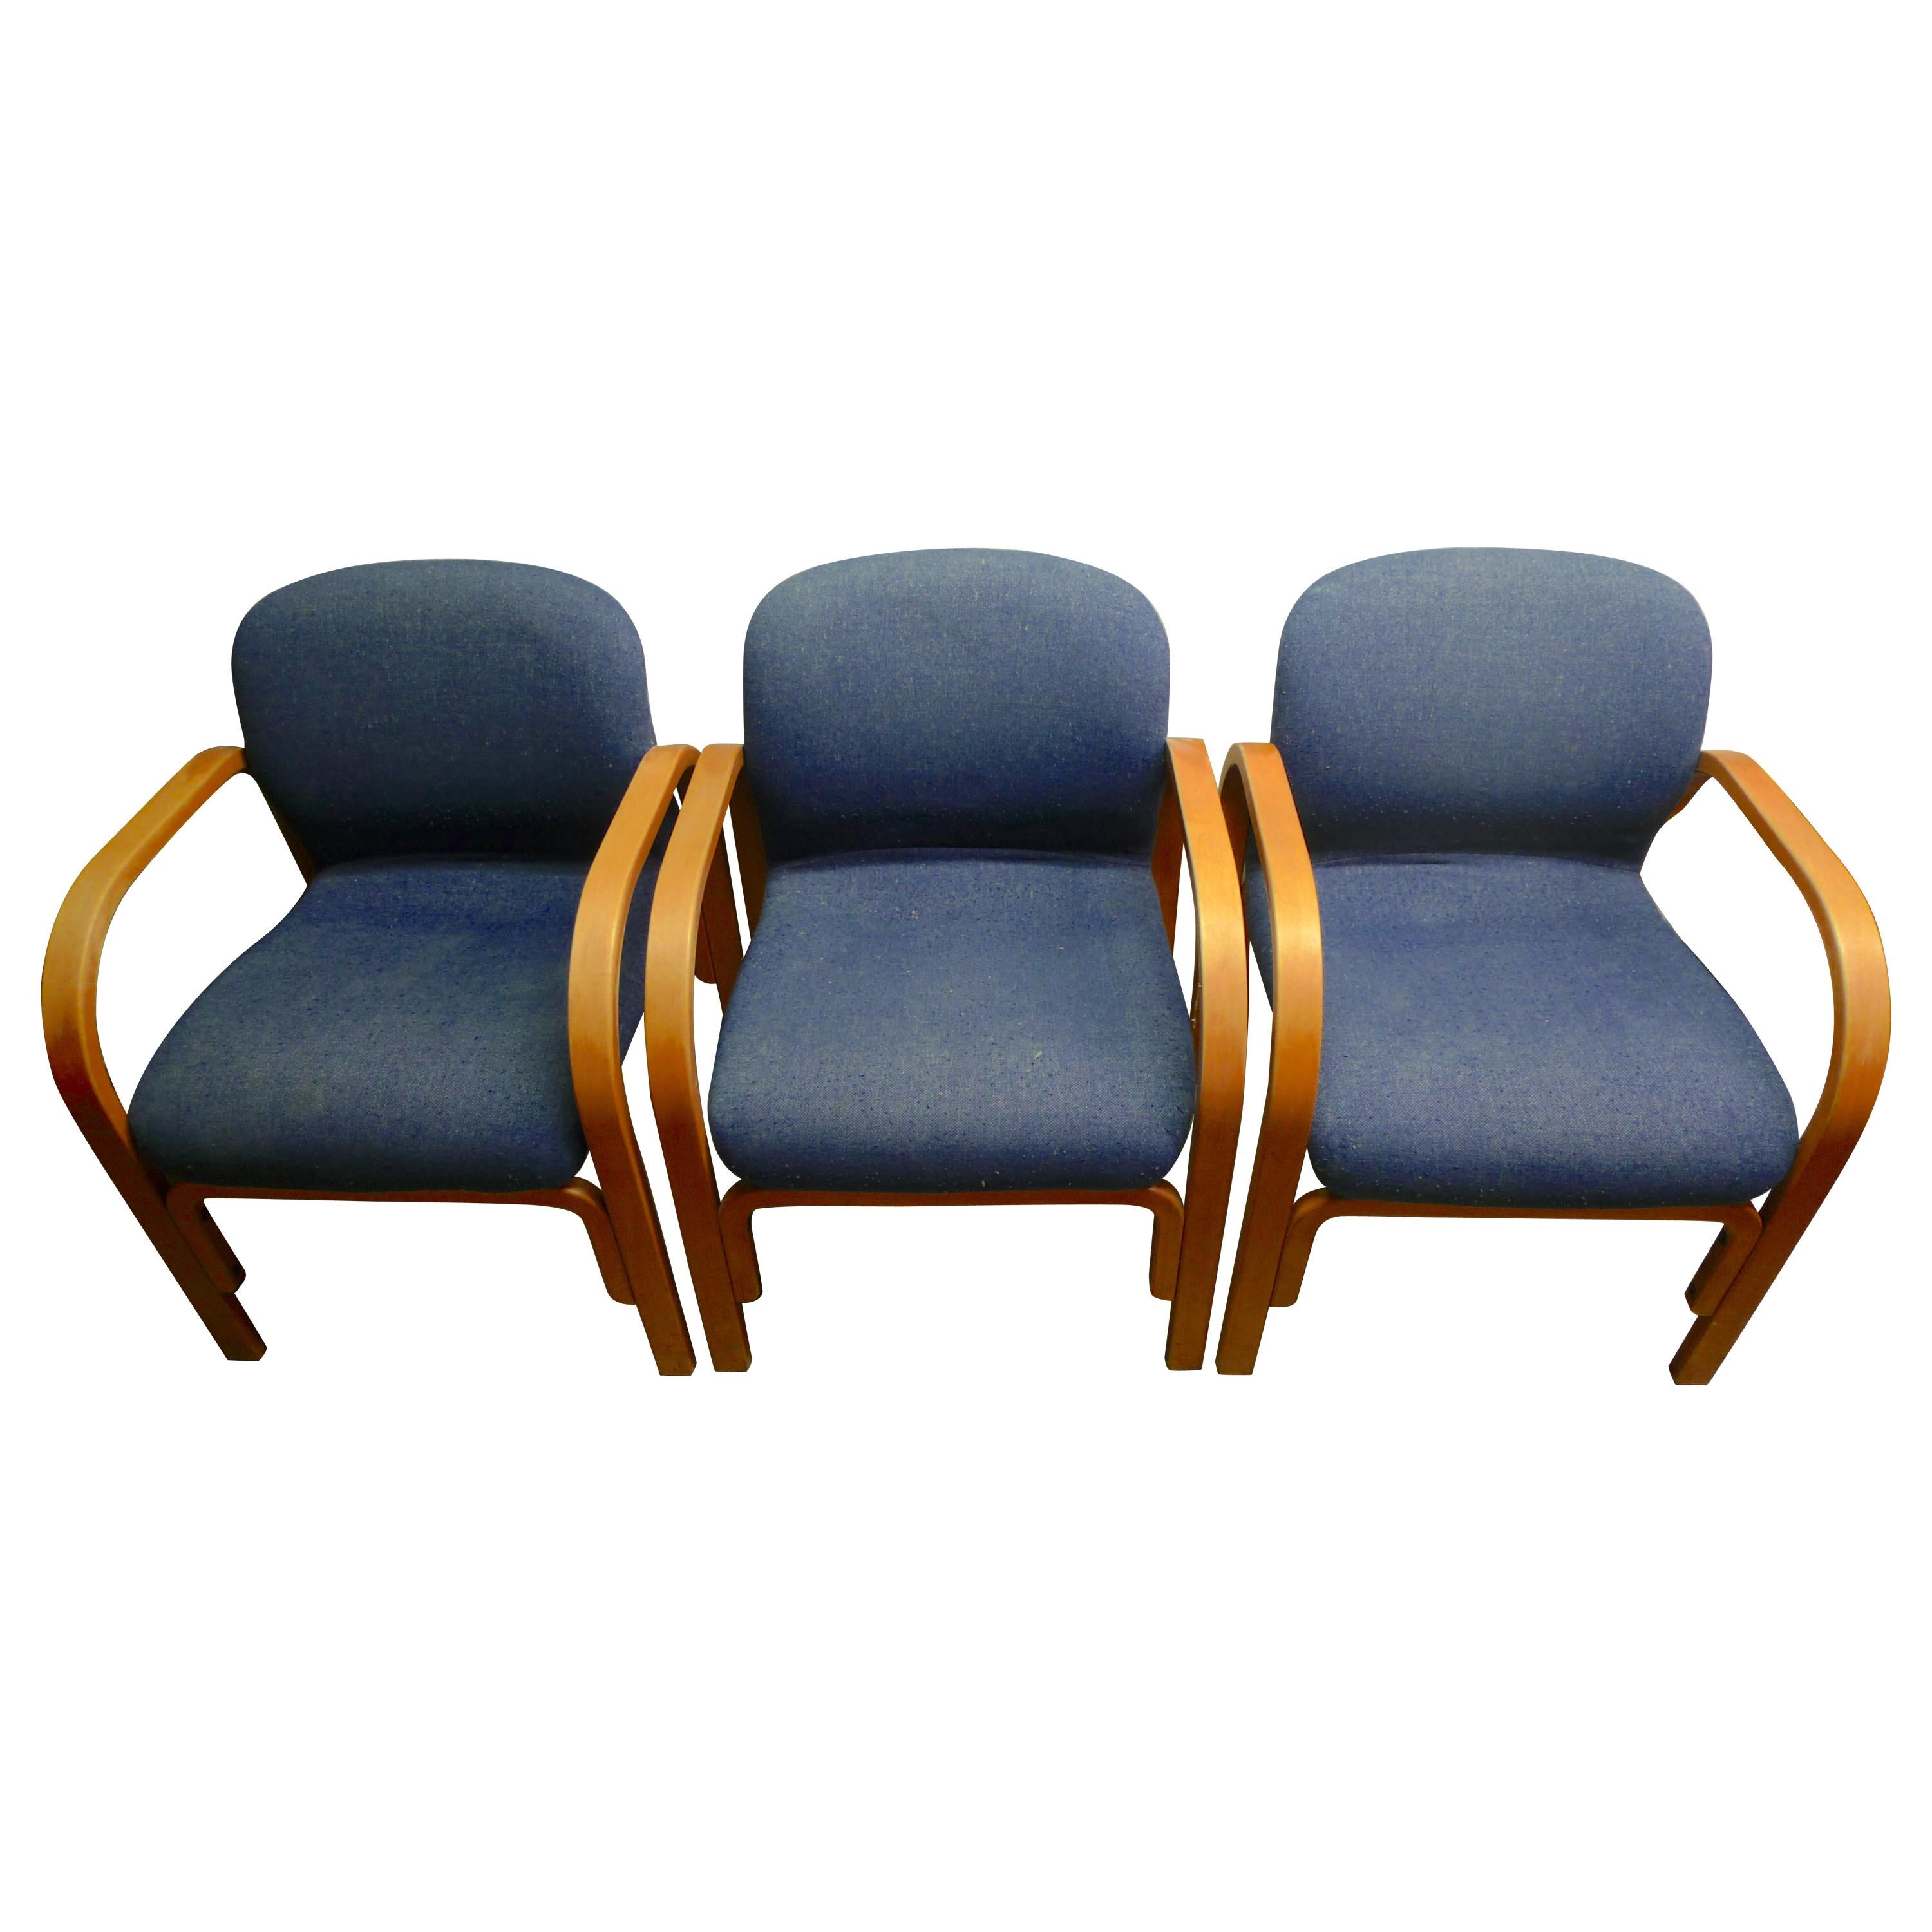 Midcentury Chairs Upholstered in Nubbly Fabric on Hardwood Frames, Set of 3 For Sale